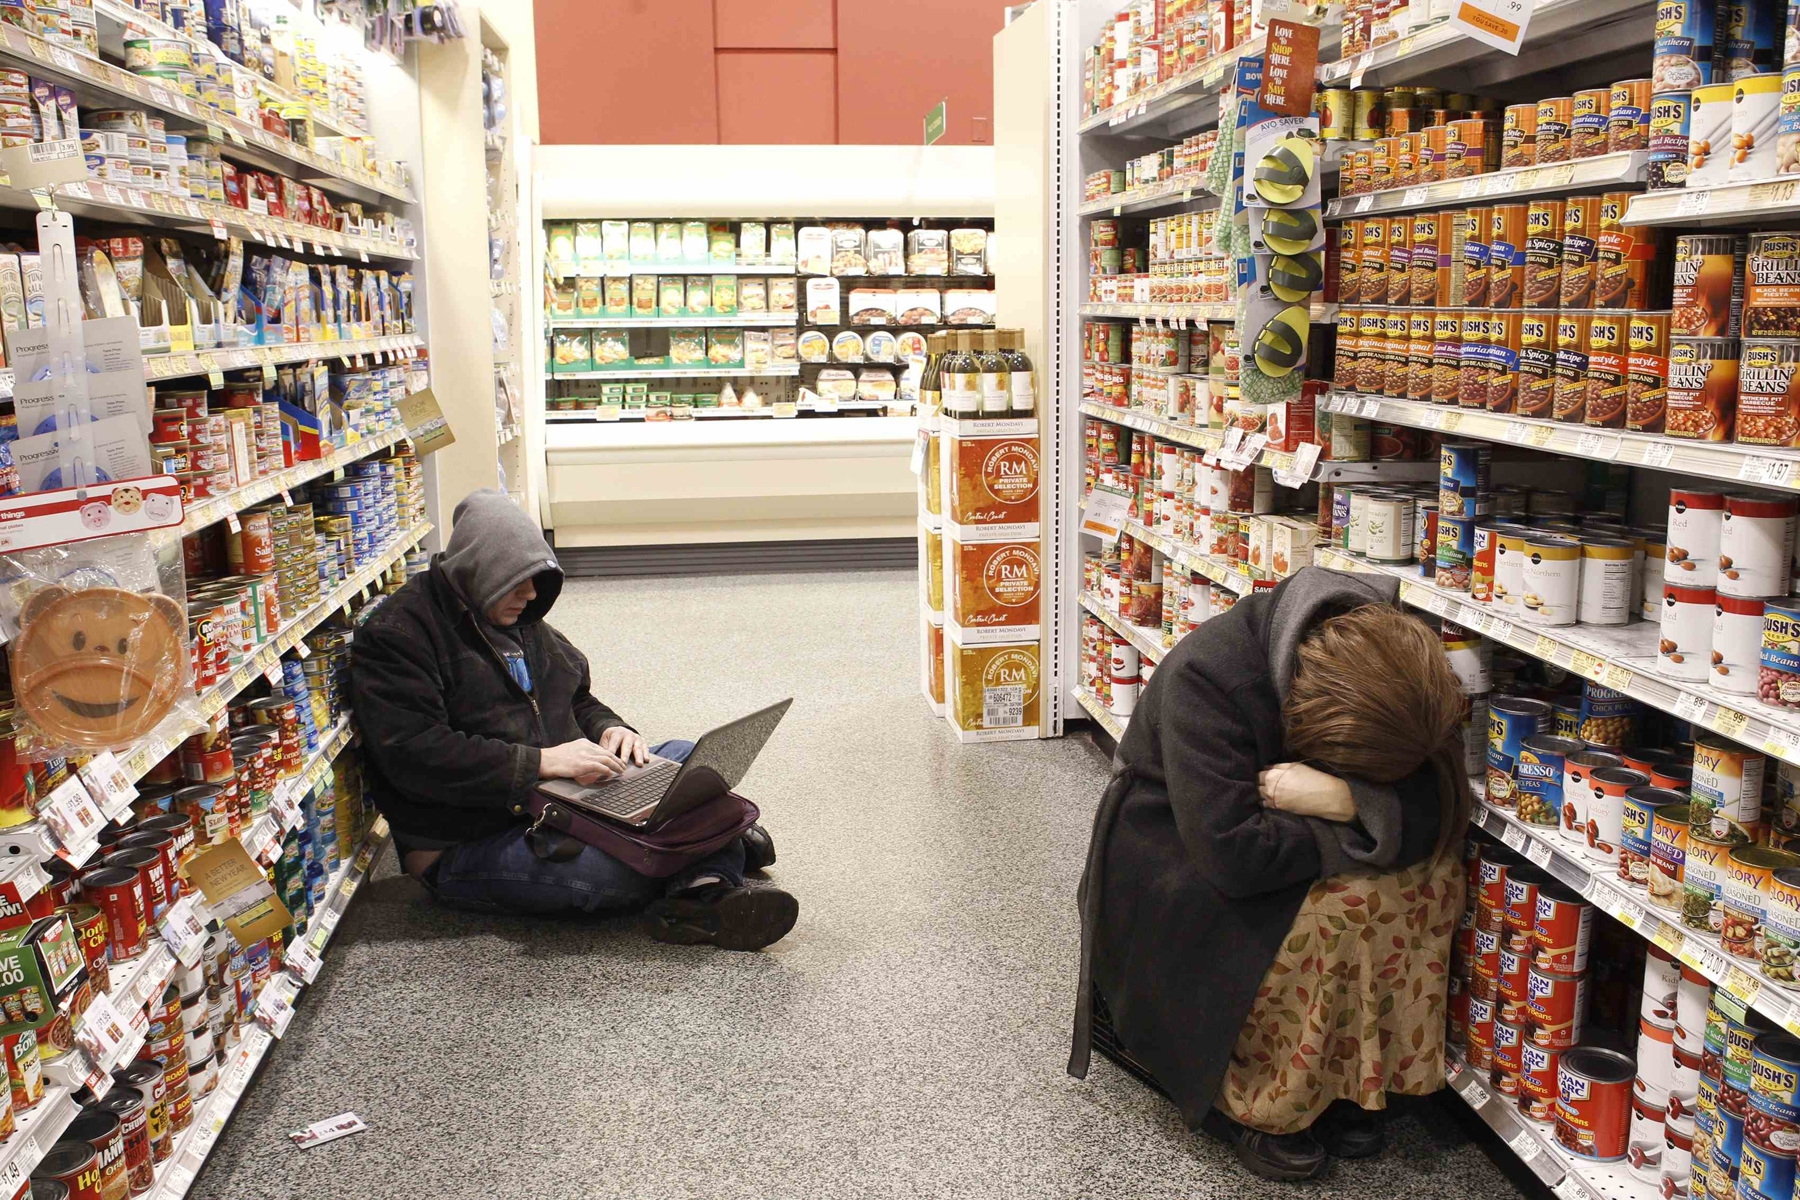 People rest at aisle of a Publix grocery store after being stranded due to a snow storm in Atlanta